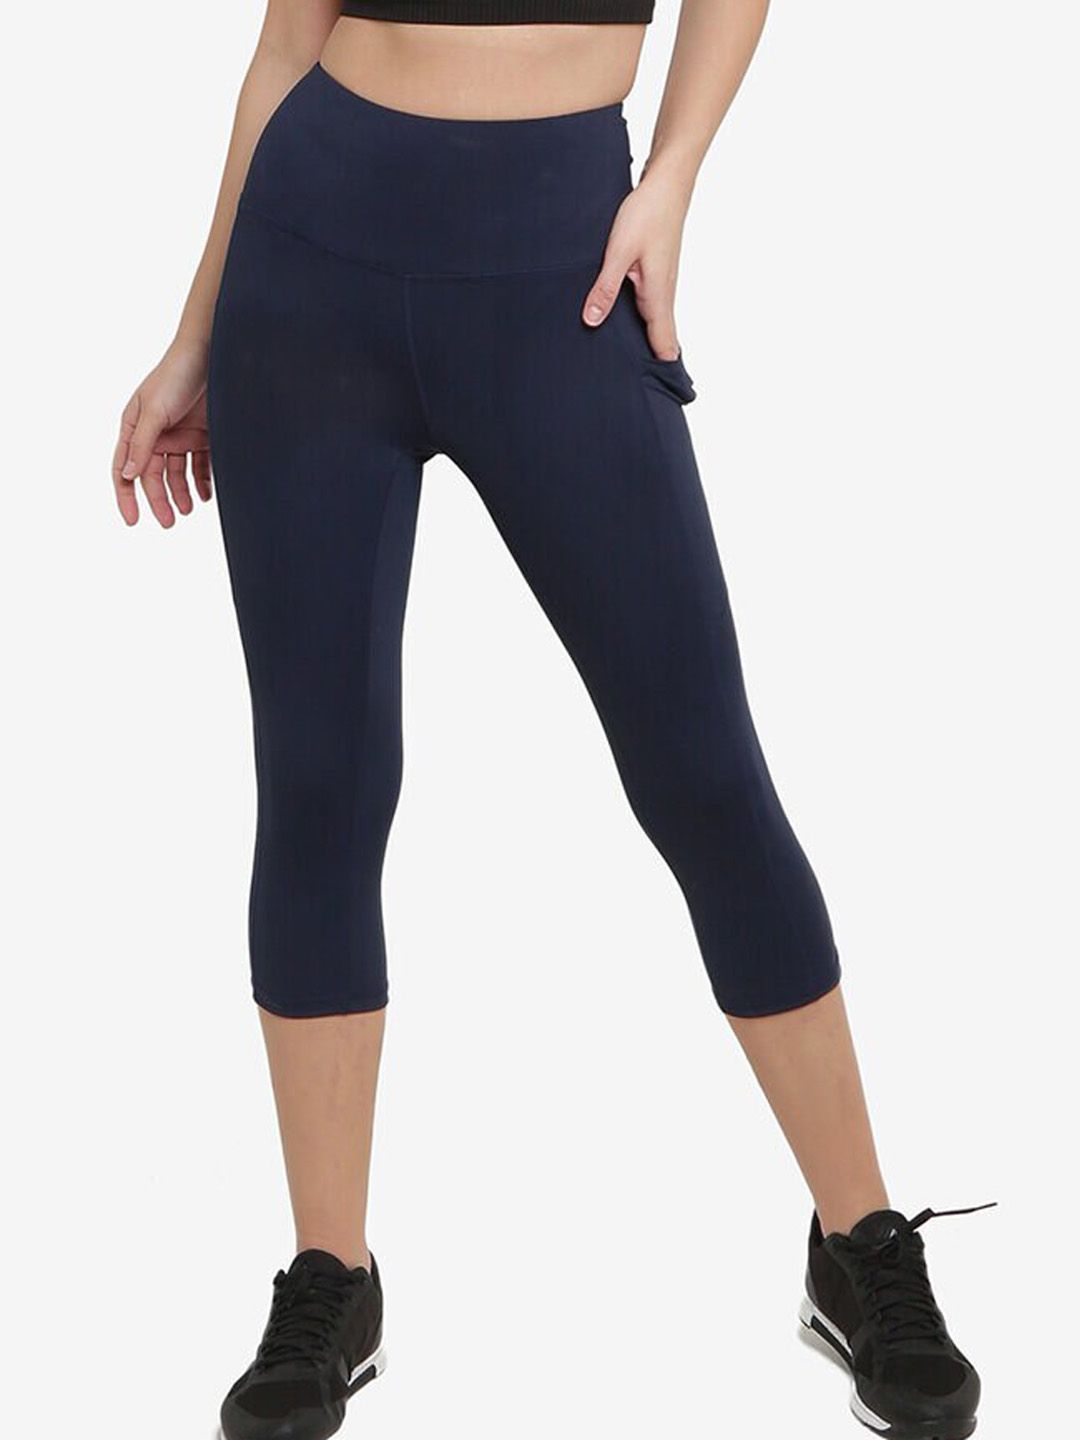 ZALORA ACTIVE Women Navy Blue Yoga Tights With Side Pockets Price in India